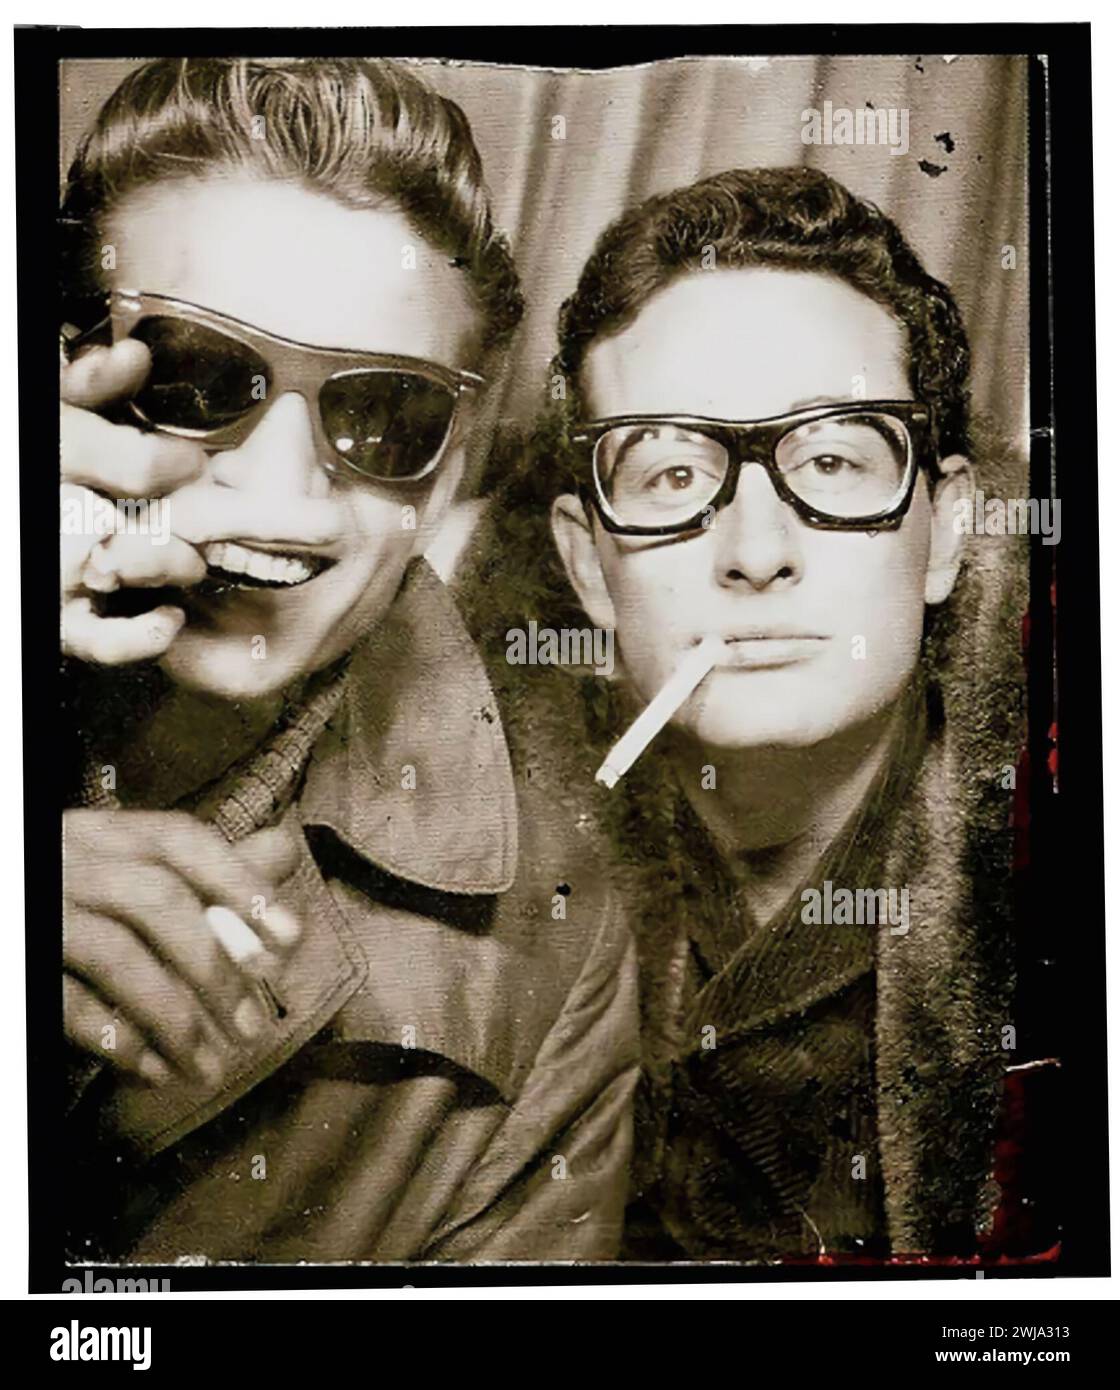 Buddy Holly and Waylon Jennings photographed in a photo-booth in Central Station, in New York City. 1959. Stock Photo